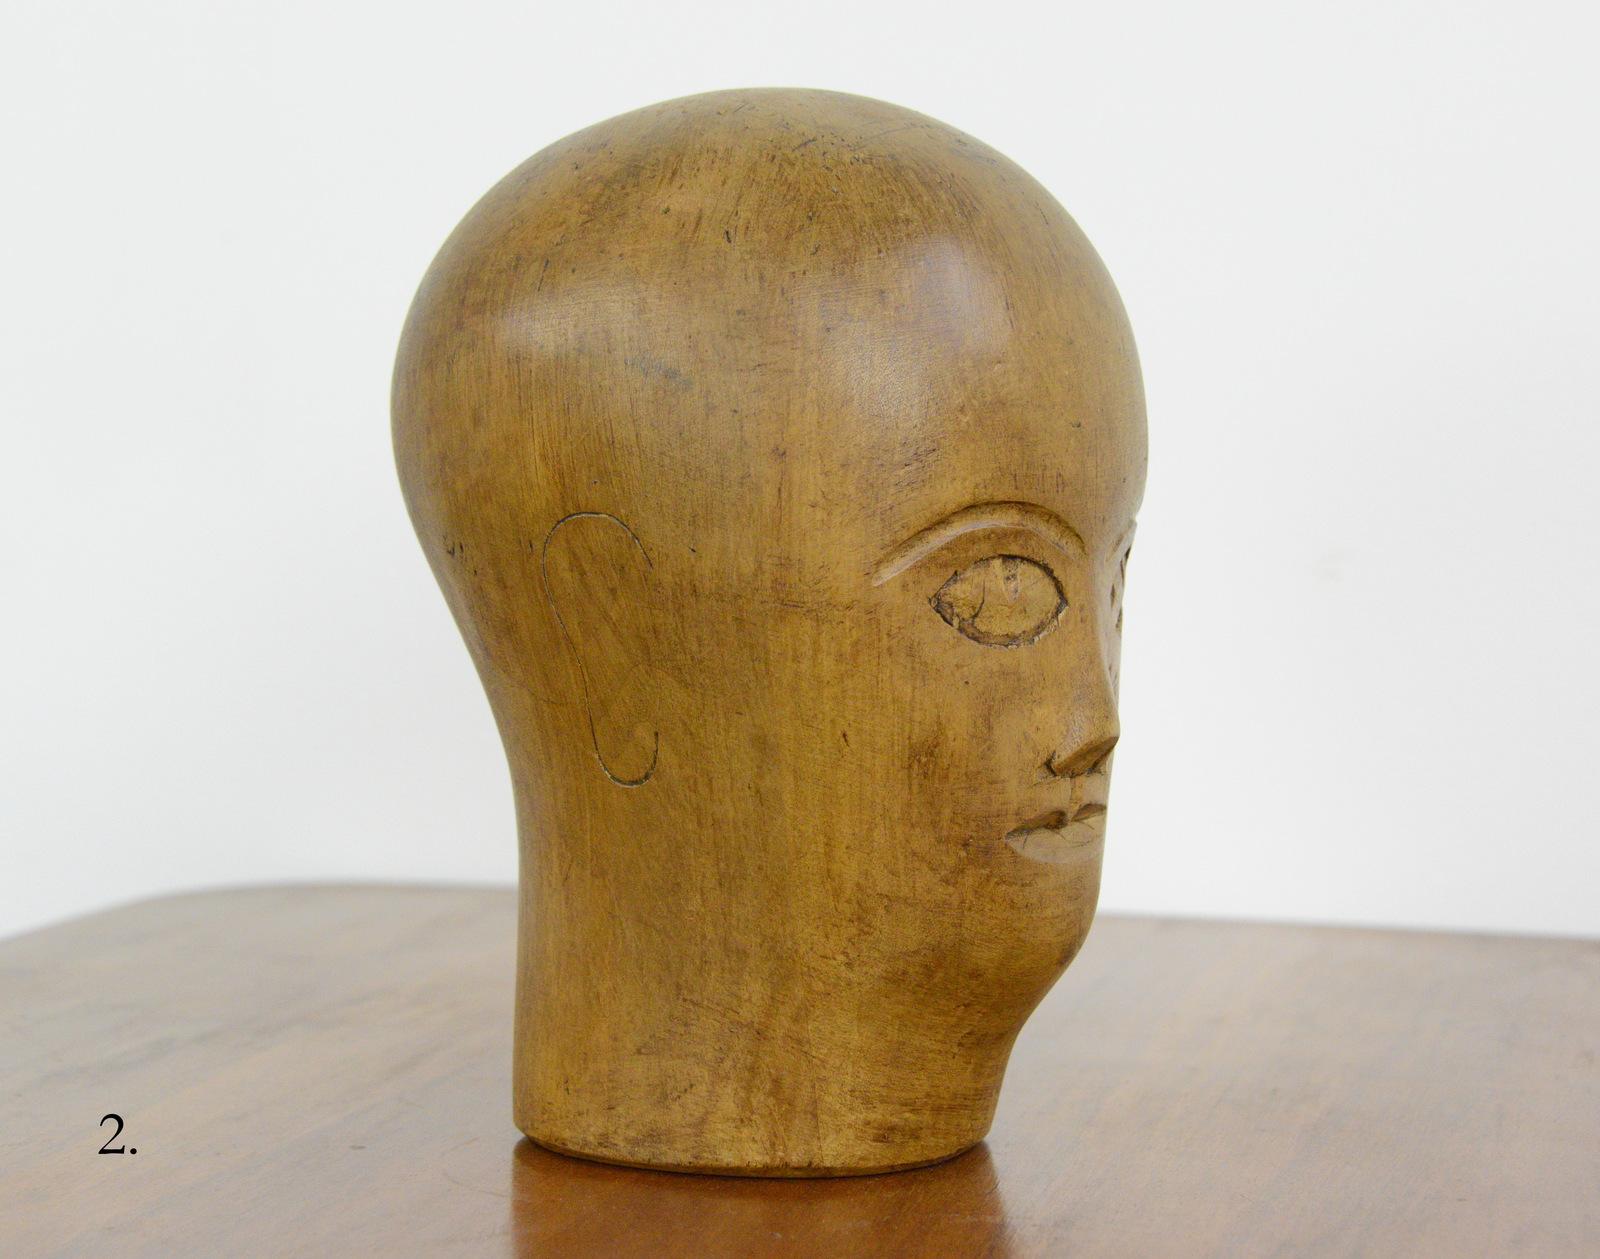 German carved wooden Milliners head circa 1920

- Hand carved from sycamore
- Used in the displaying and making of hats
- German ~ 1920
- Measures: 25cm tall x 15cm wide x 18cm deep

Condition report

Signs of its previous in the form of